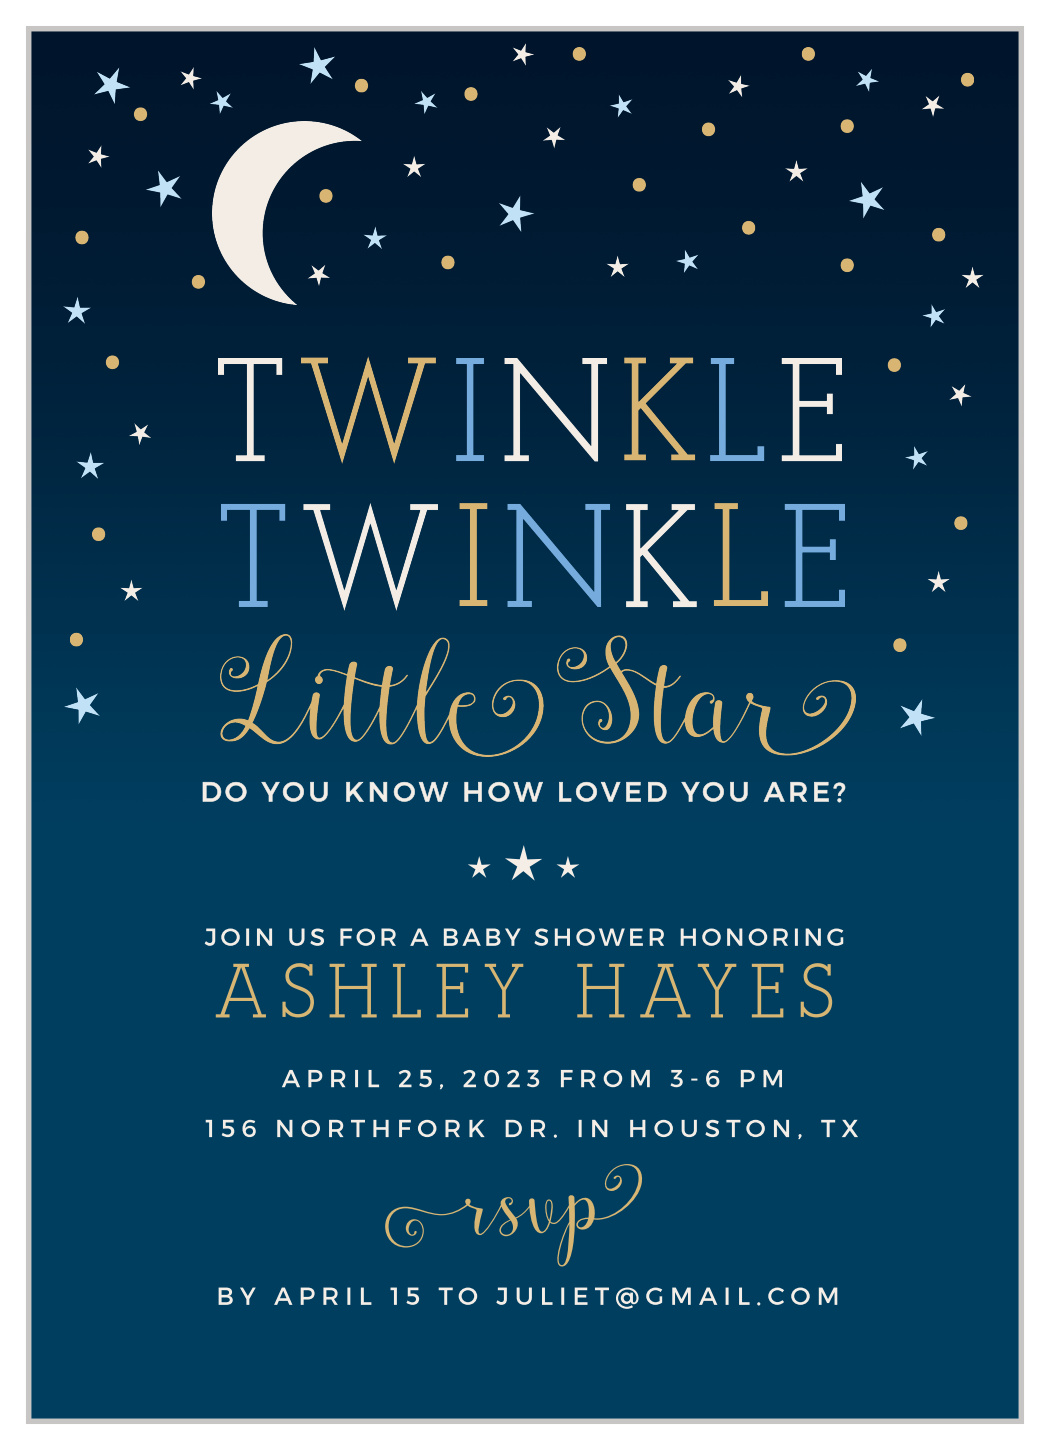 Twinkle Little Star Baby Shower Invitations by Basic Invite